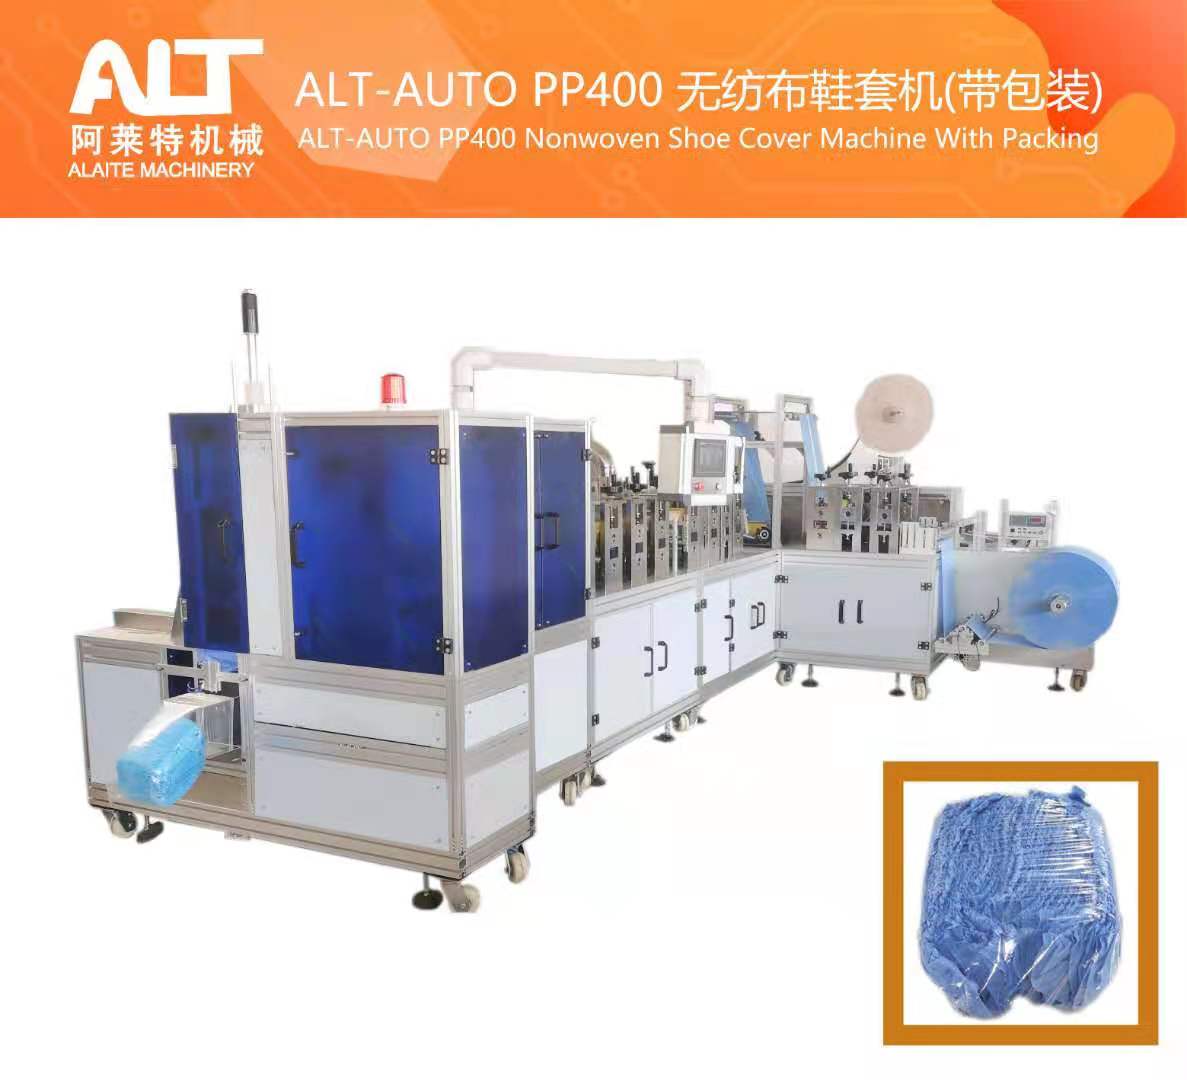 new machine(nonwoven shoe cover machine with packing)